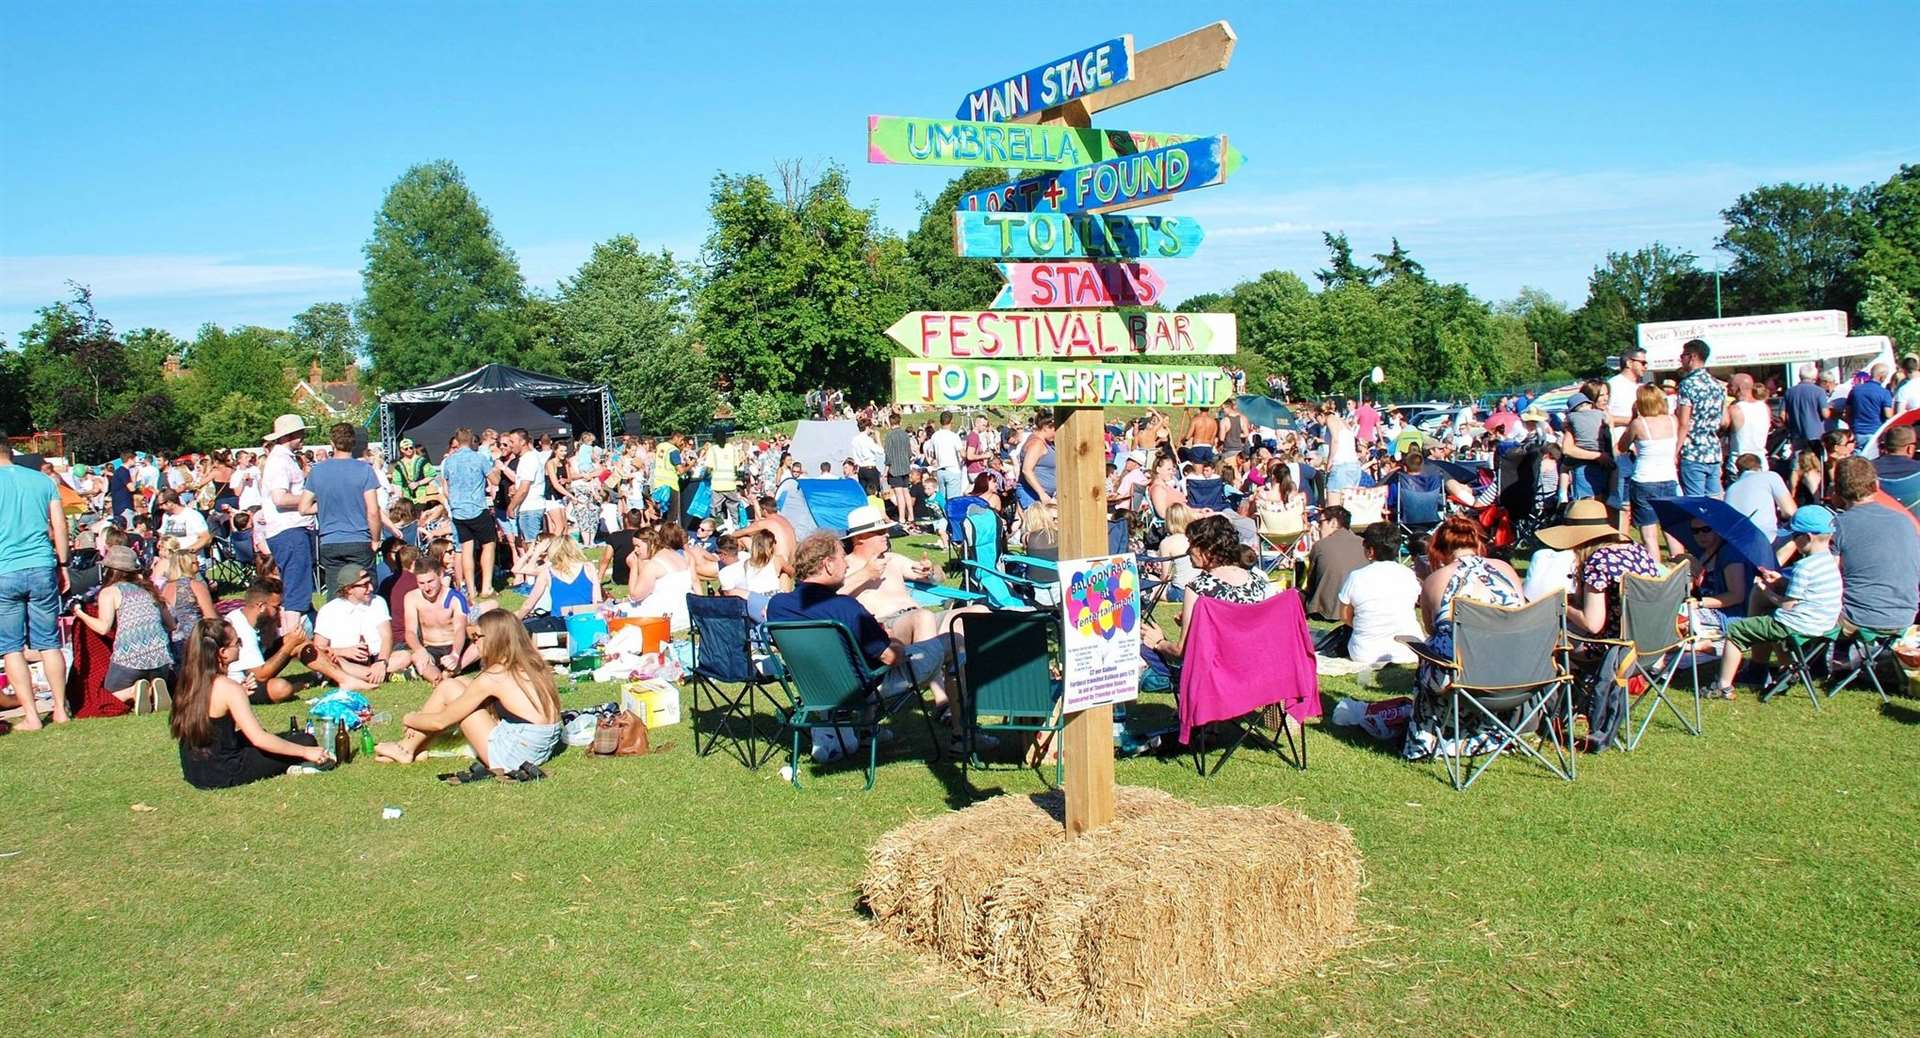 The Kent Fest, a family festival with music, food and activities, is